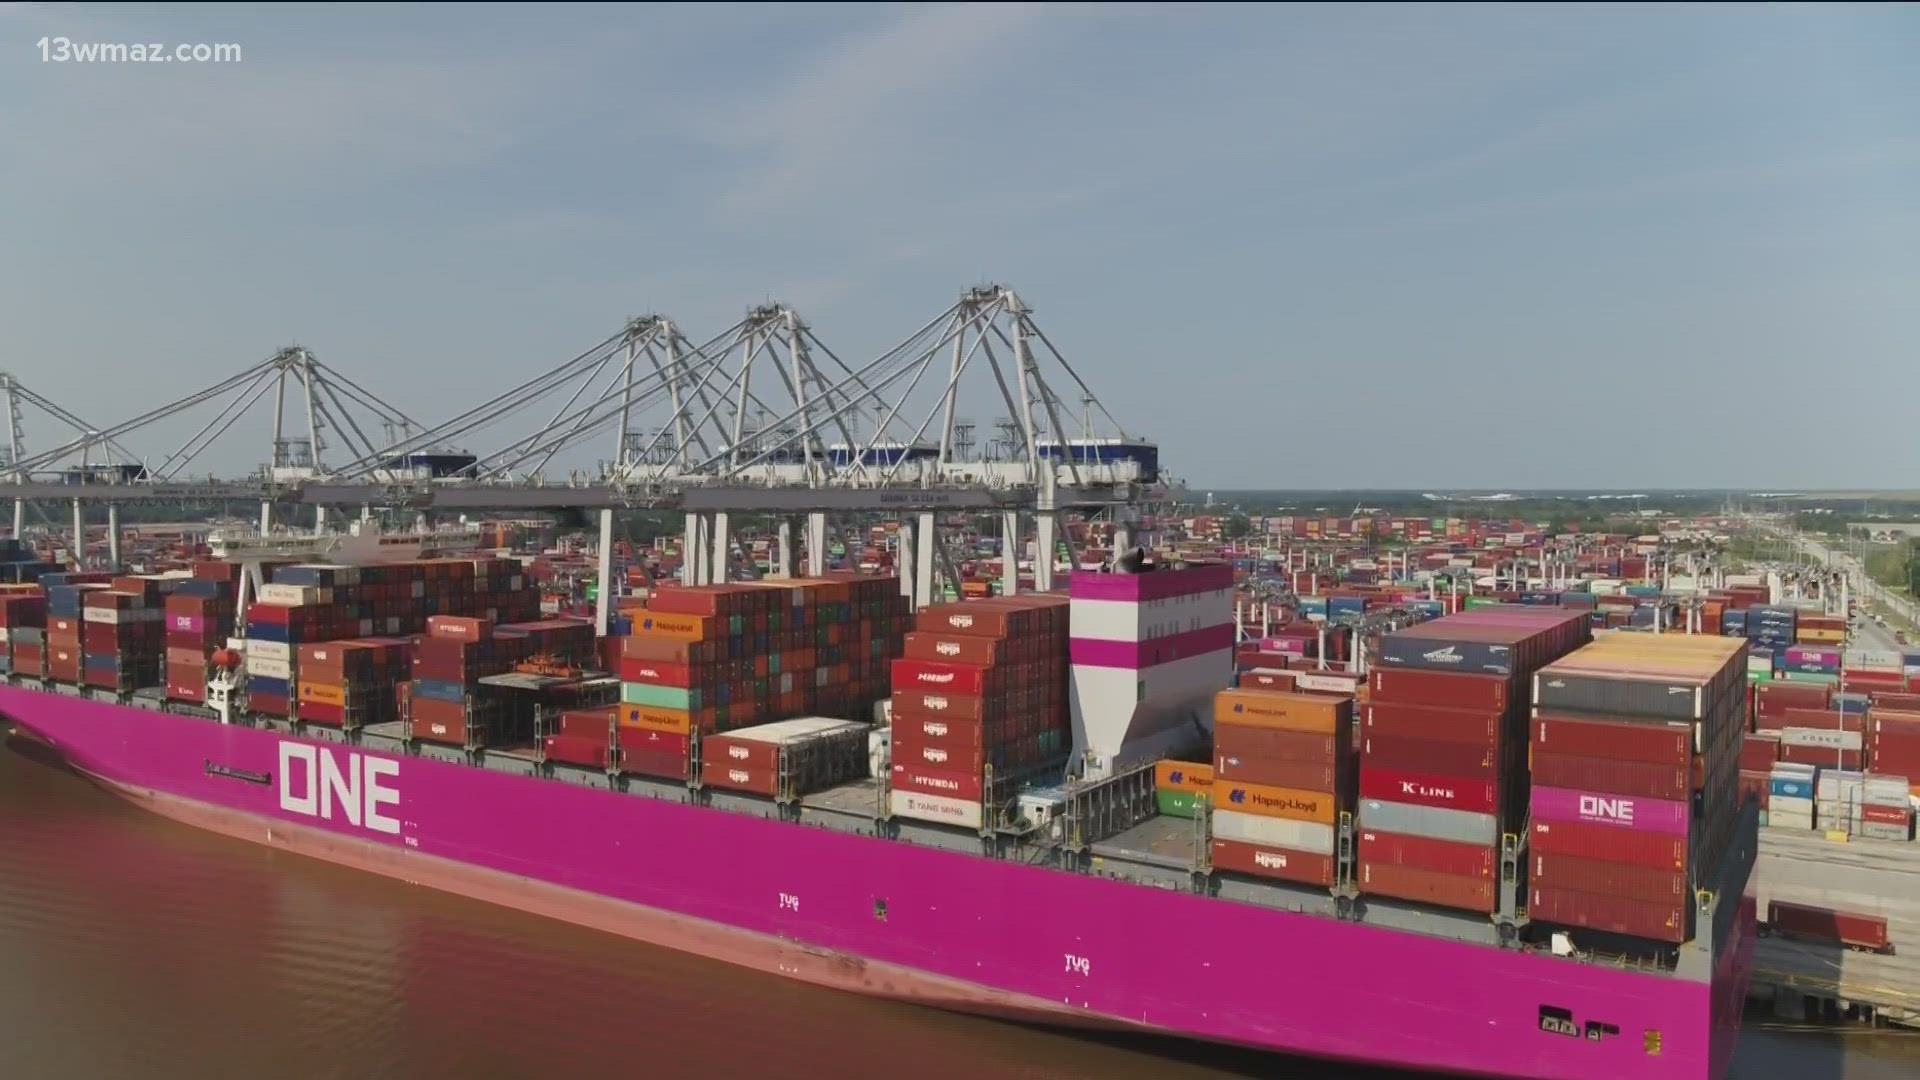 13WMAZ's Suzanne Lawler got to go behind the scenes in Savannah to see how the port works as it looks to expand.